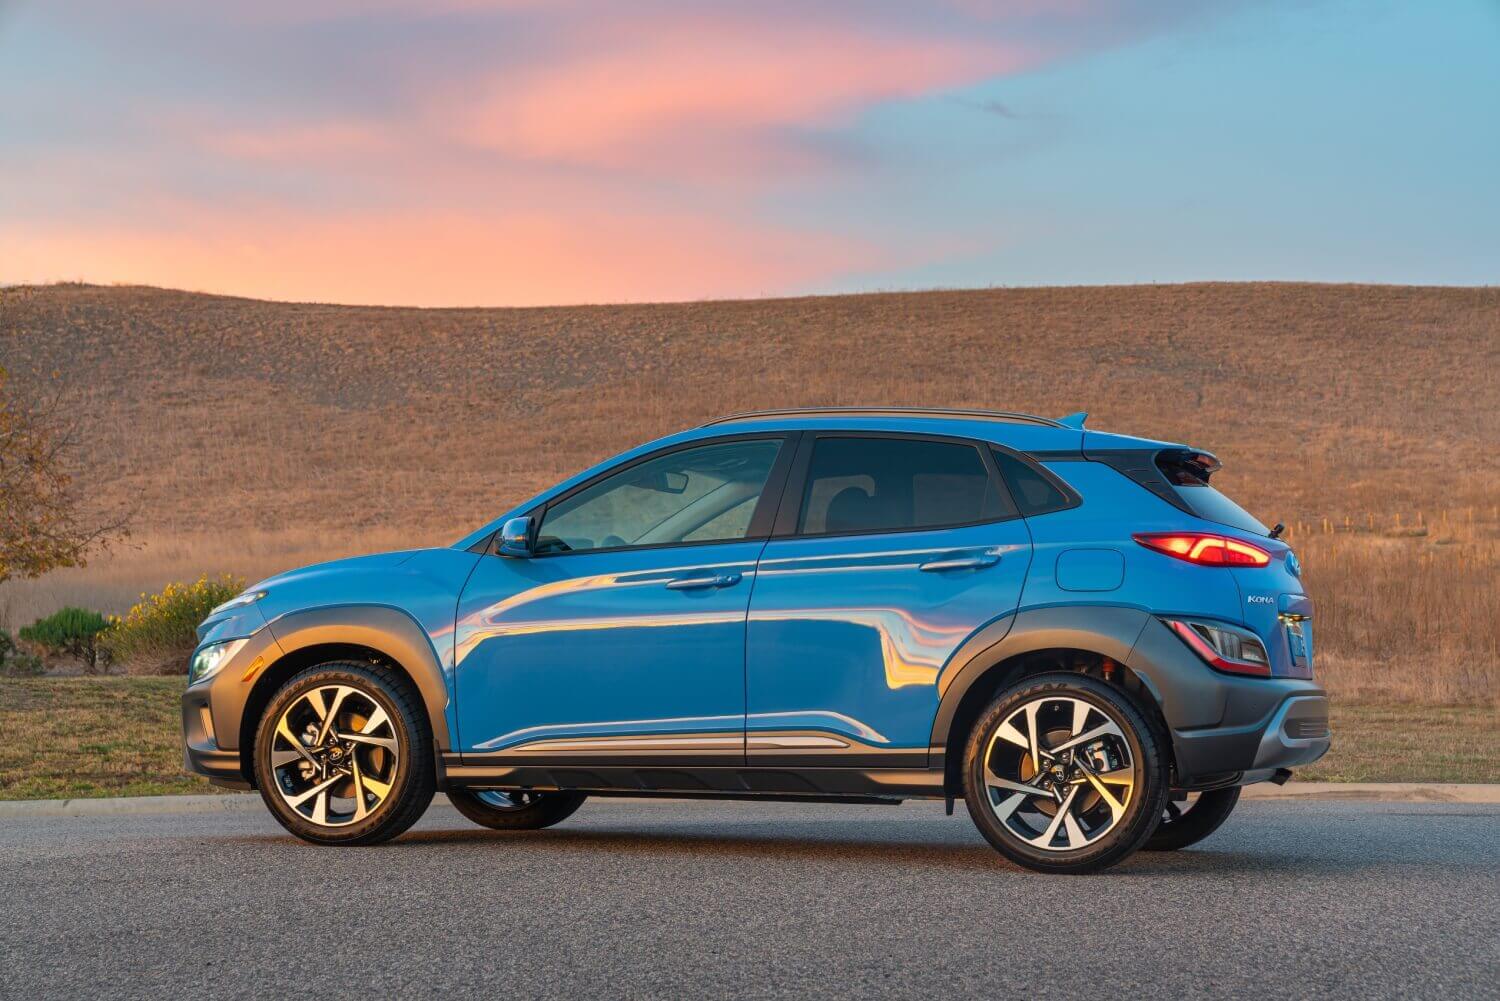 The best SUVs for new drivers include this blue 2023 Hyundai Kona